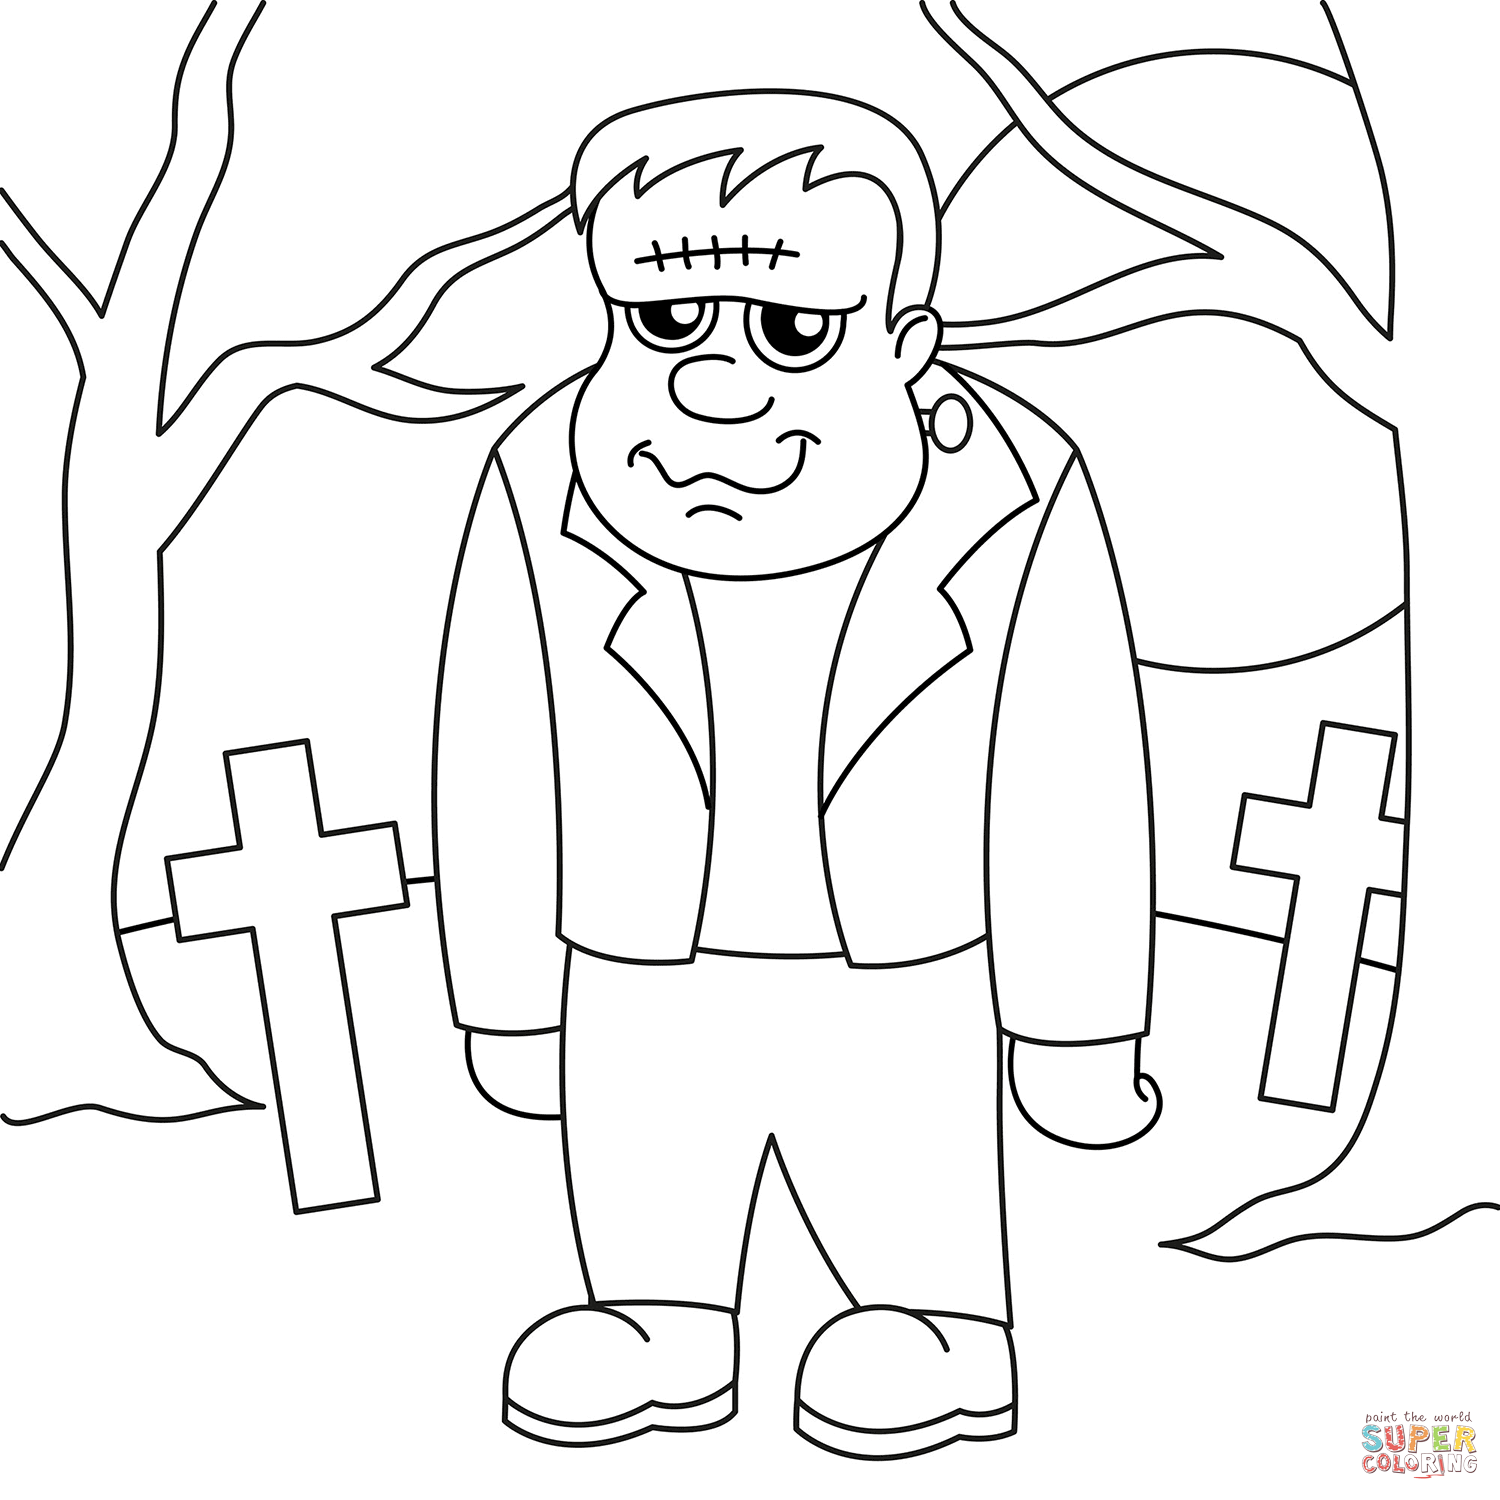 Cartoon frankenstein coloring page free printable coloring pages